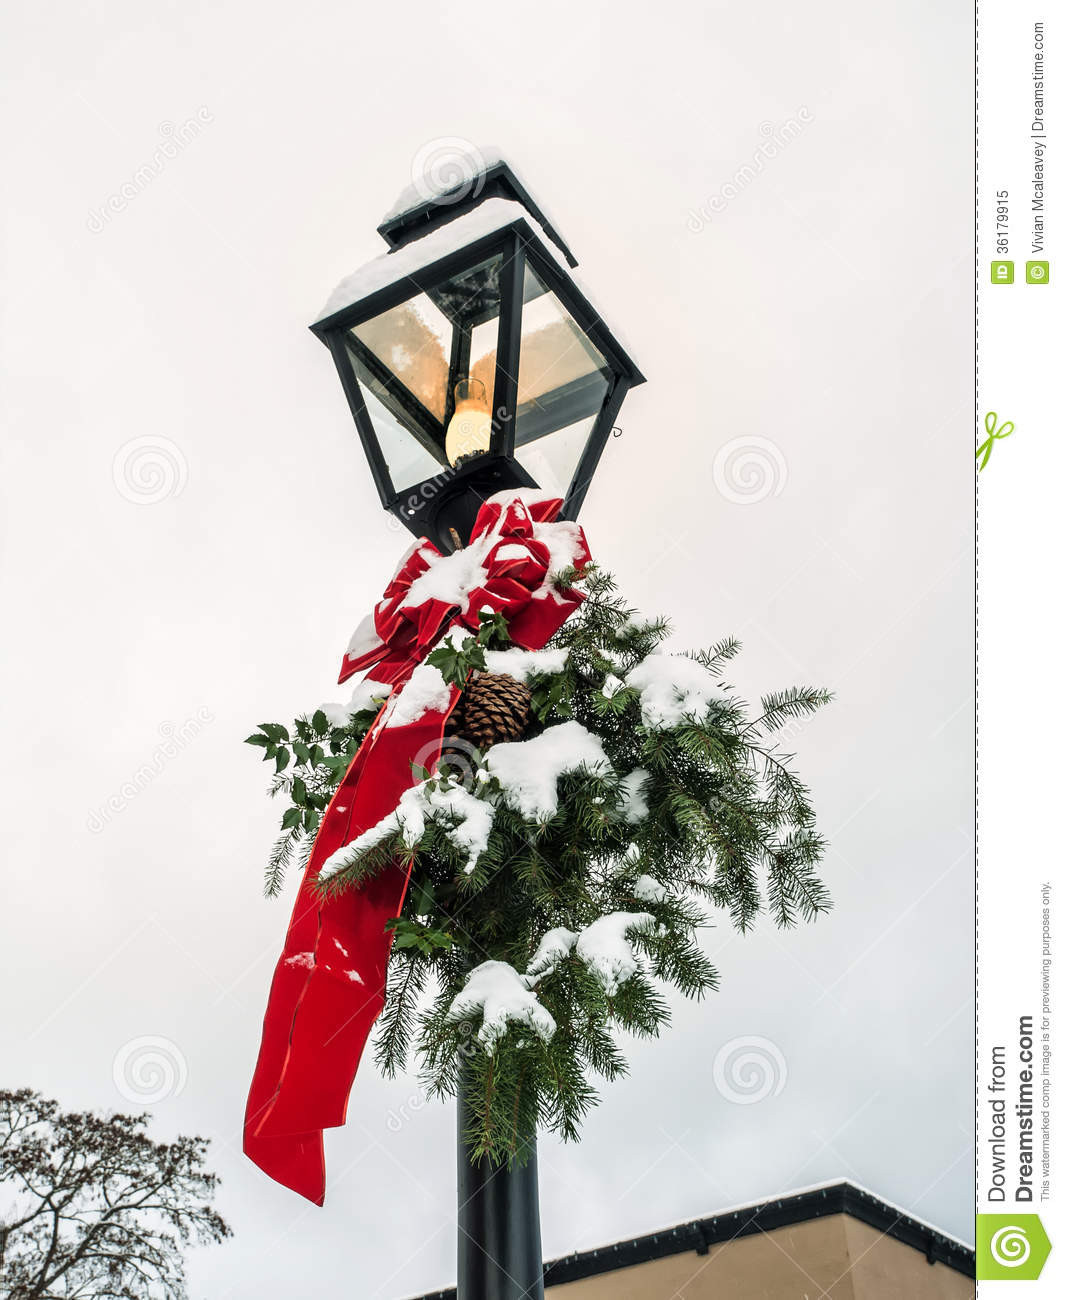 Christmas Lamp Post Decoration
 Lamp Post With Christmas Decoration Stock Image Image of